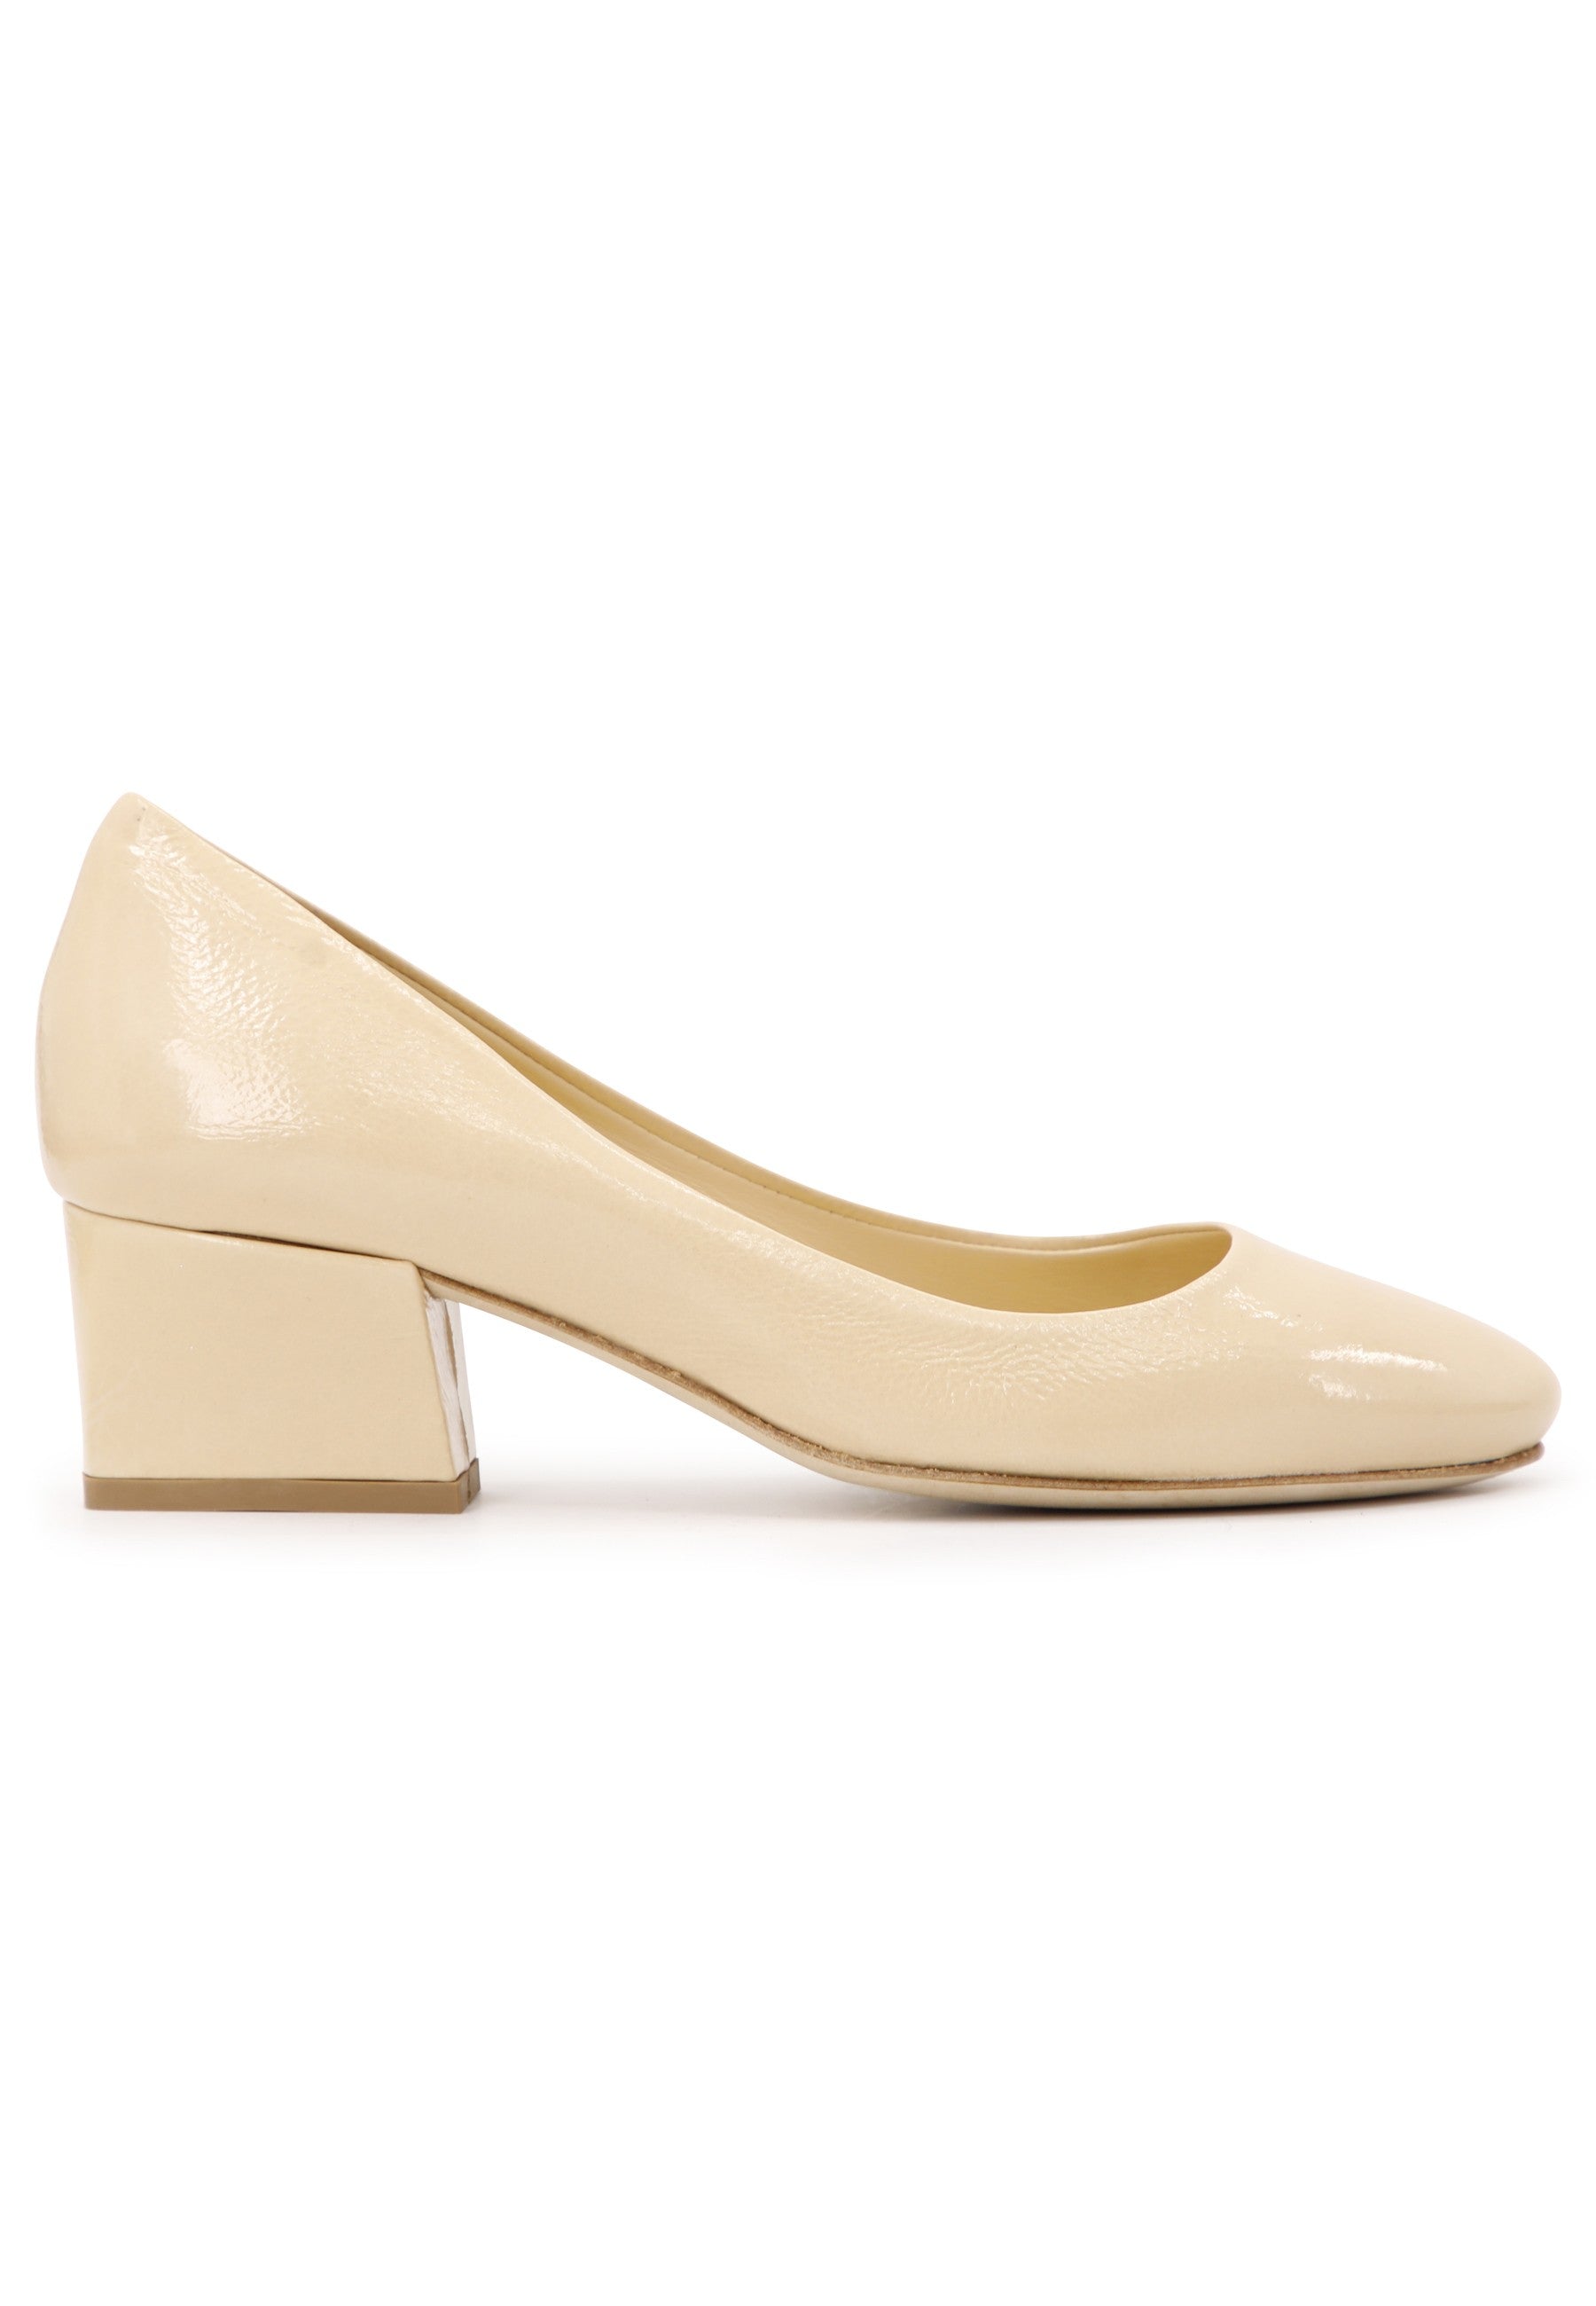 Women's beige patent pumps with low heel and round toe